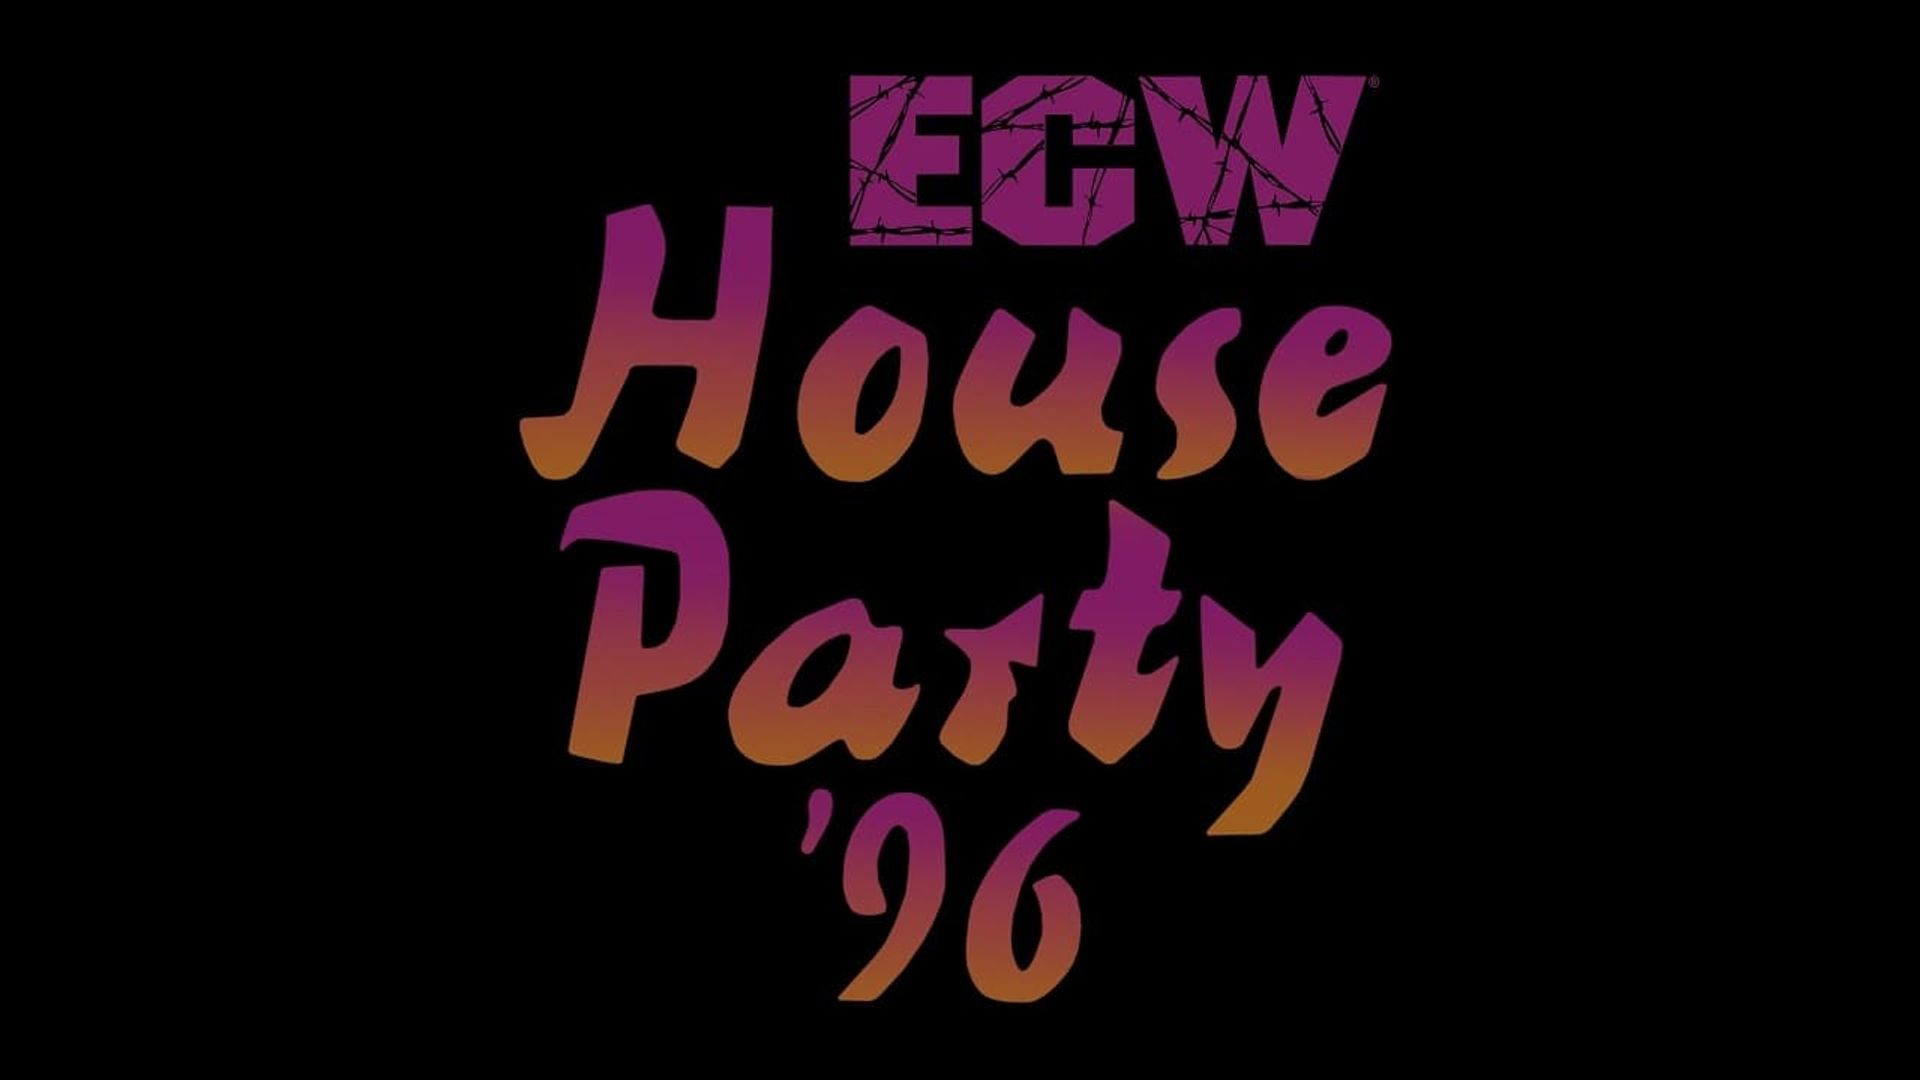 ECW House Party '96 background